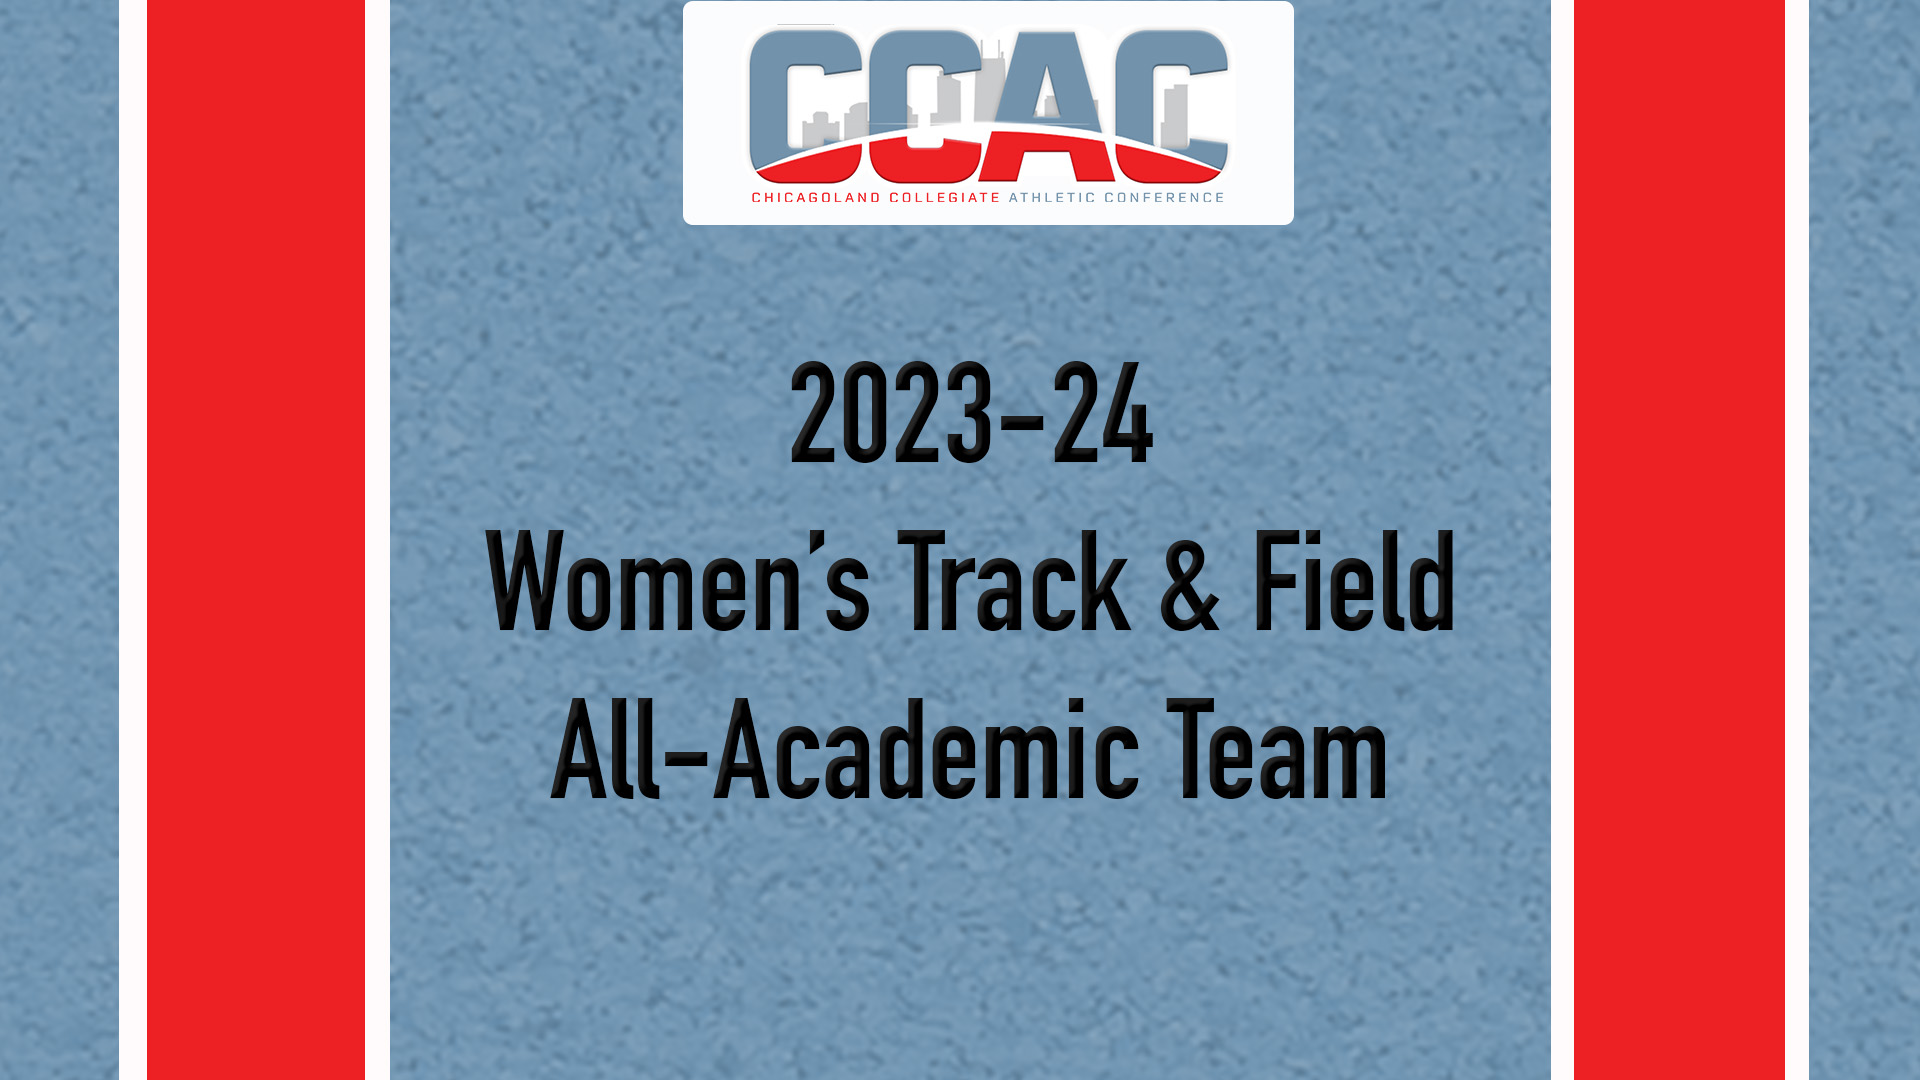 Conference Champion ONU Tops List of Women's Track & Field All-Academic Selections